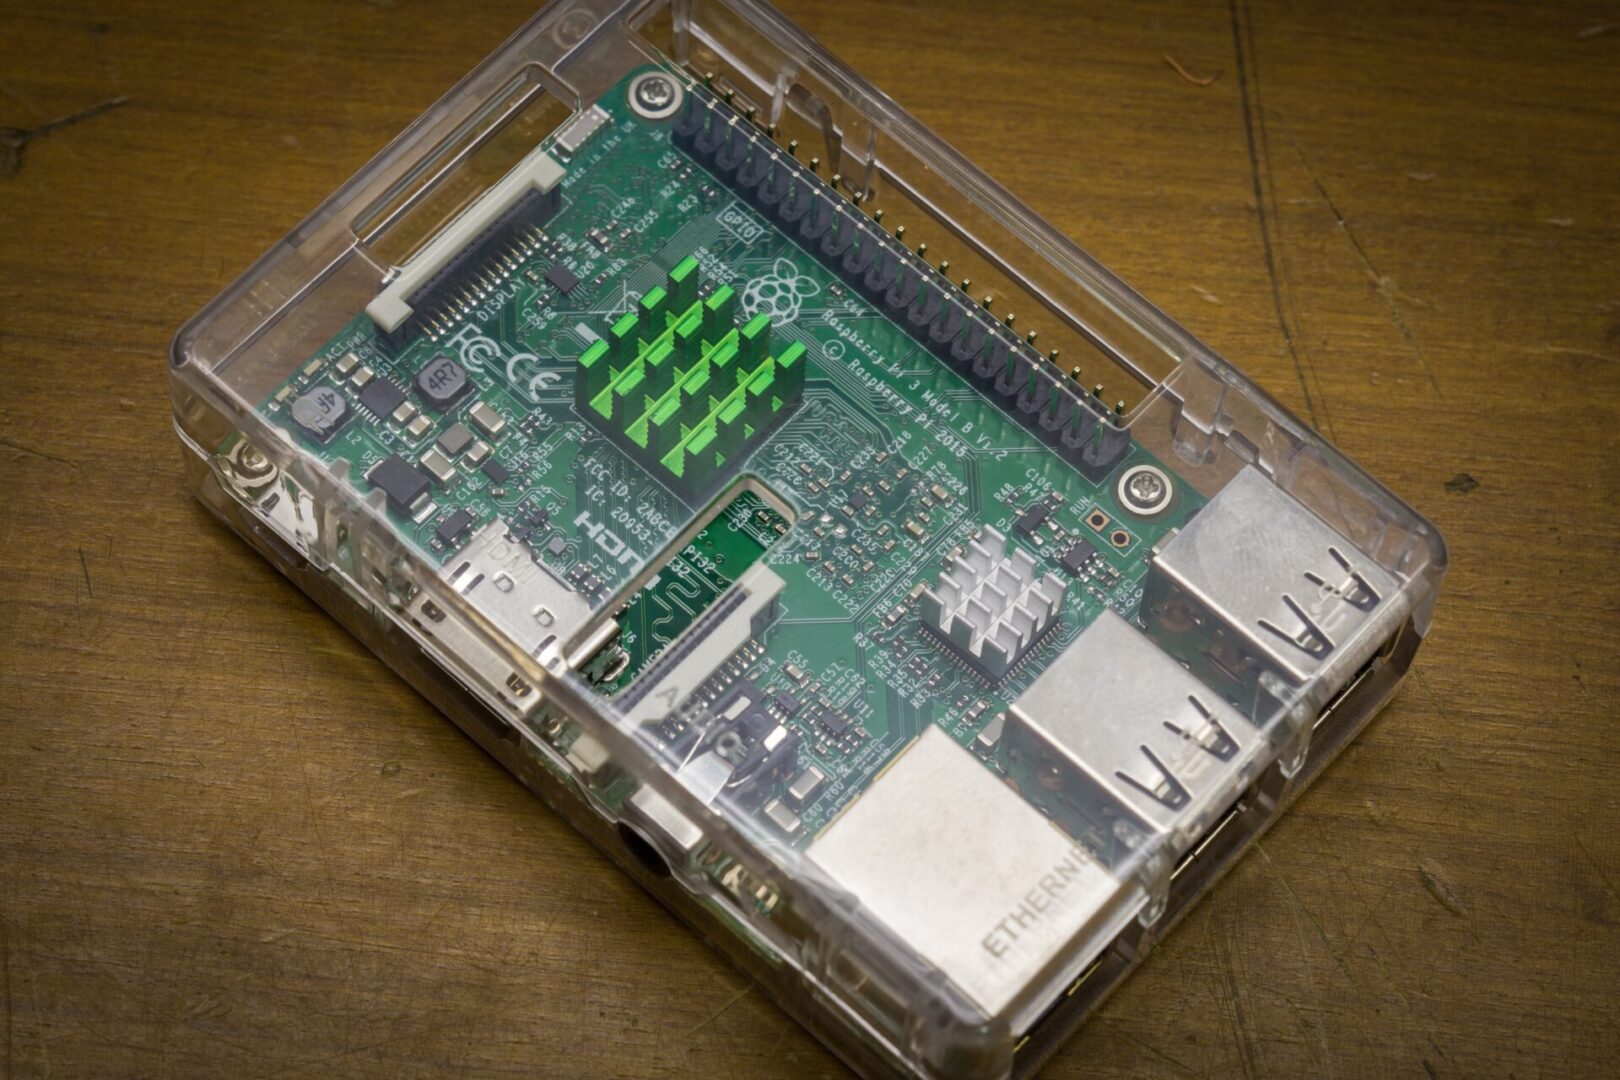 A raspberry pi is shown with green buttons.